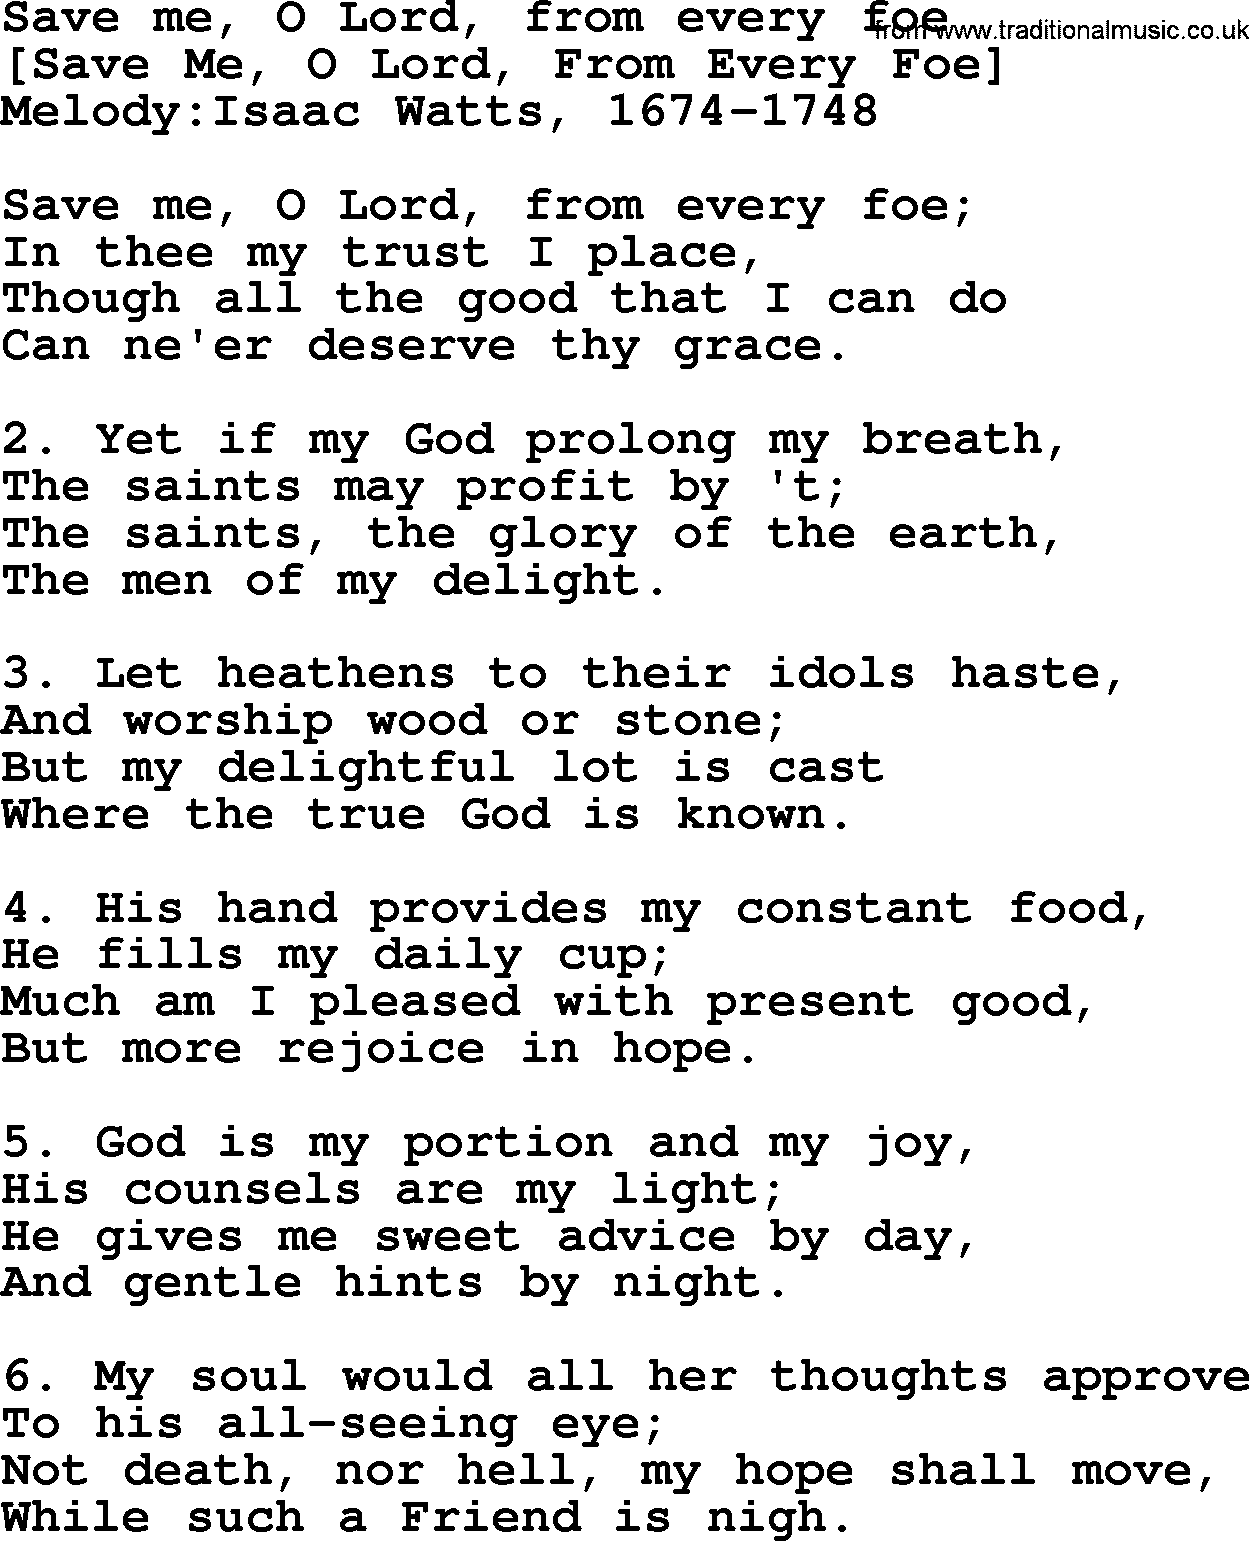 Old English Song: Save Me, O Lord, From Every Foe lyrics